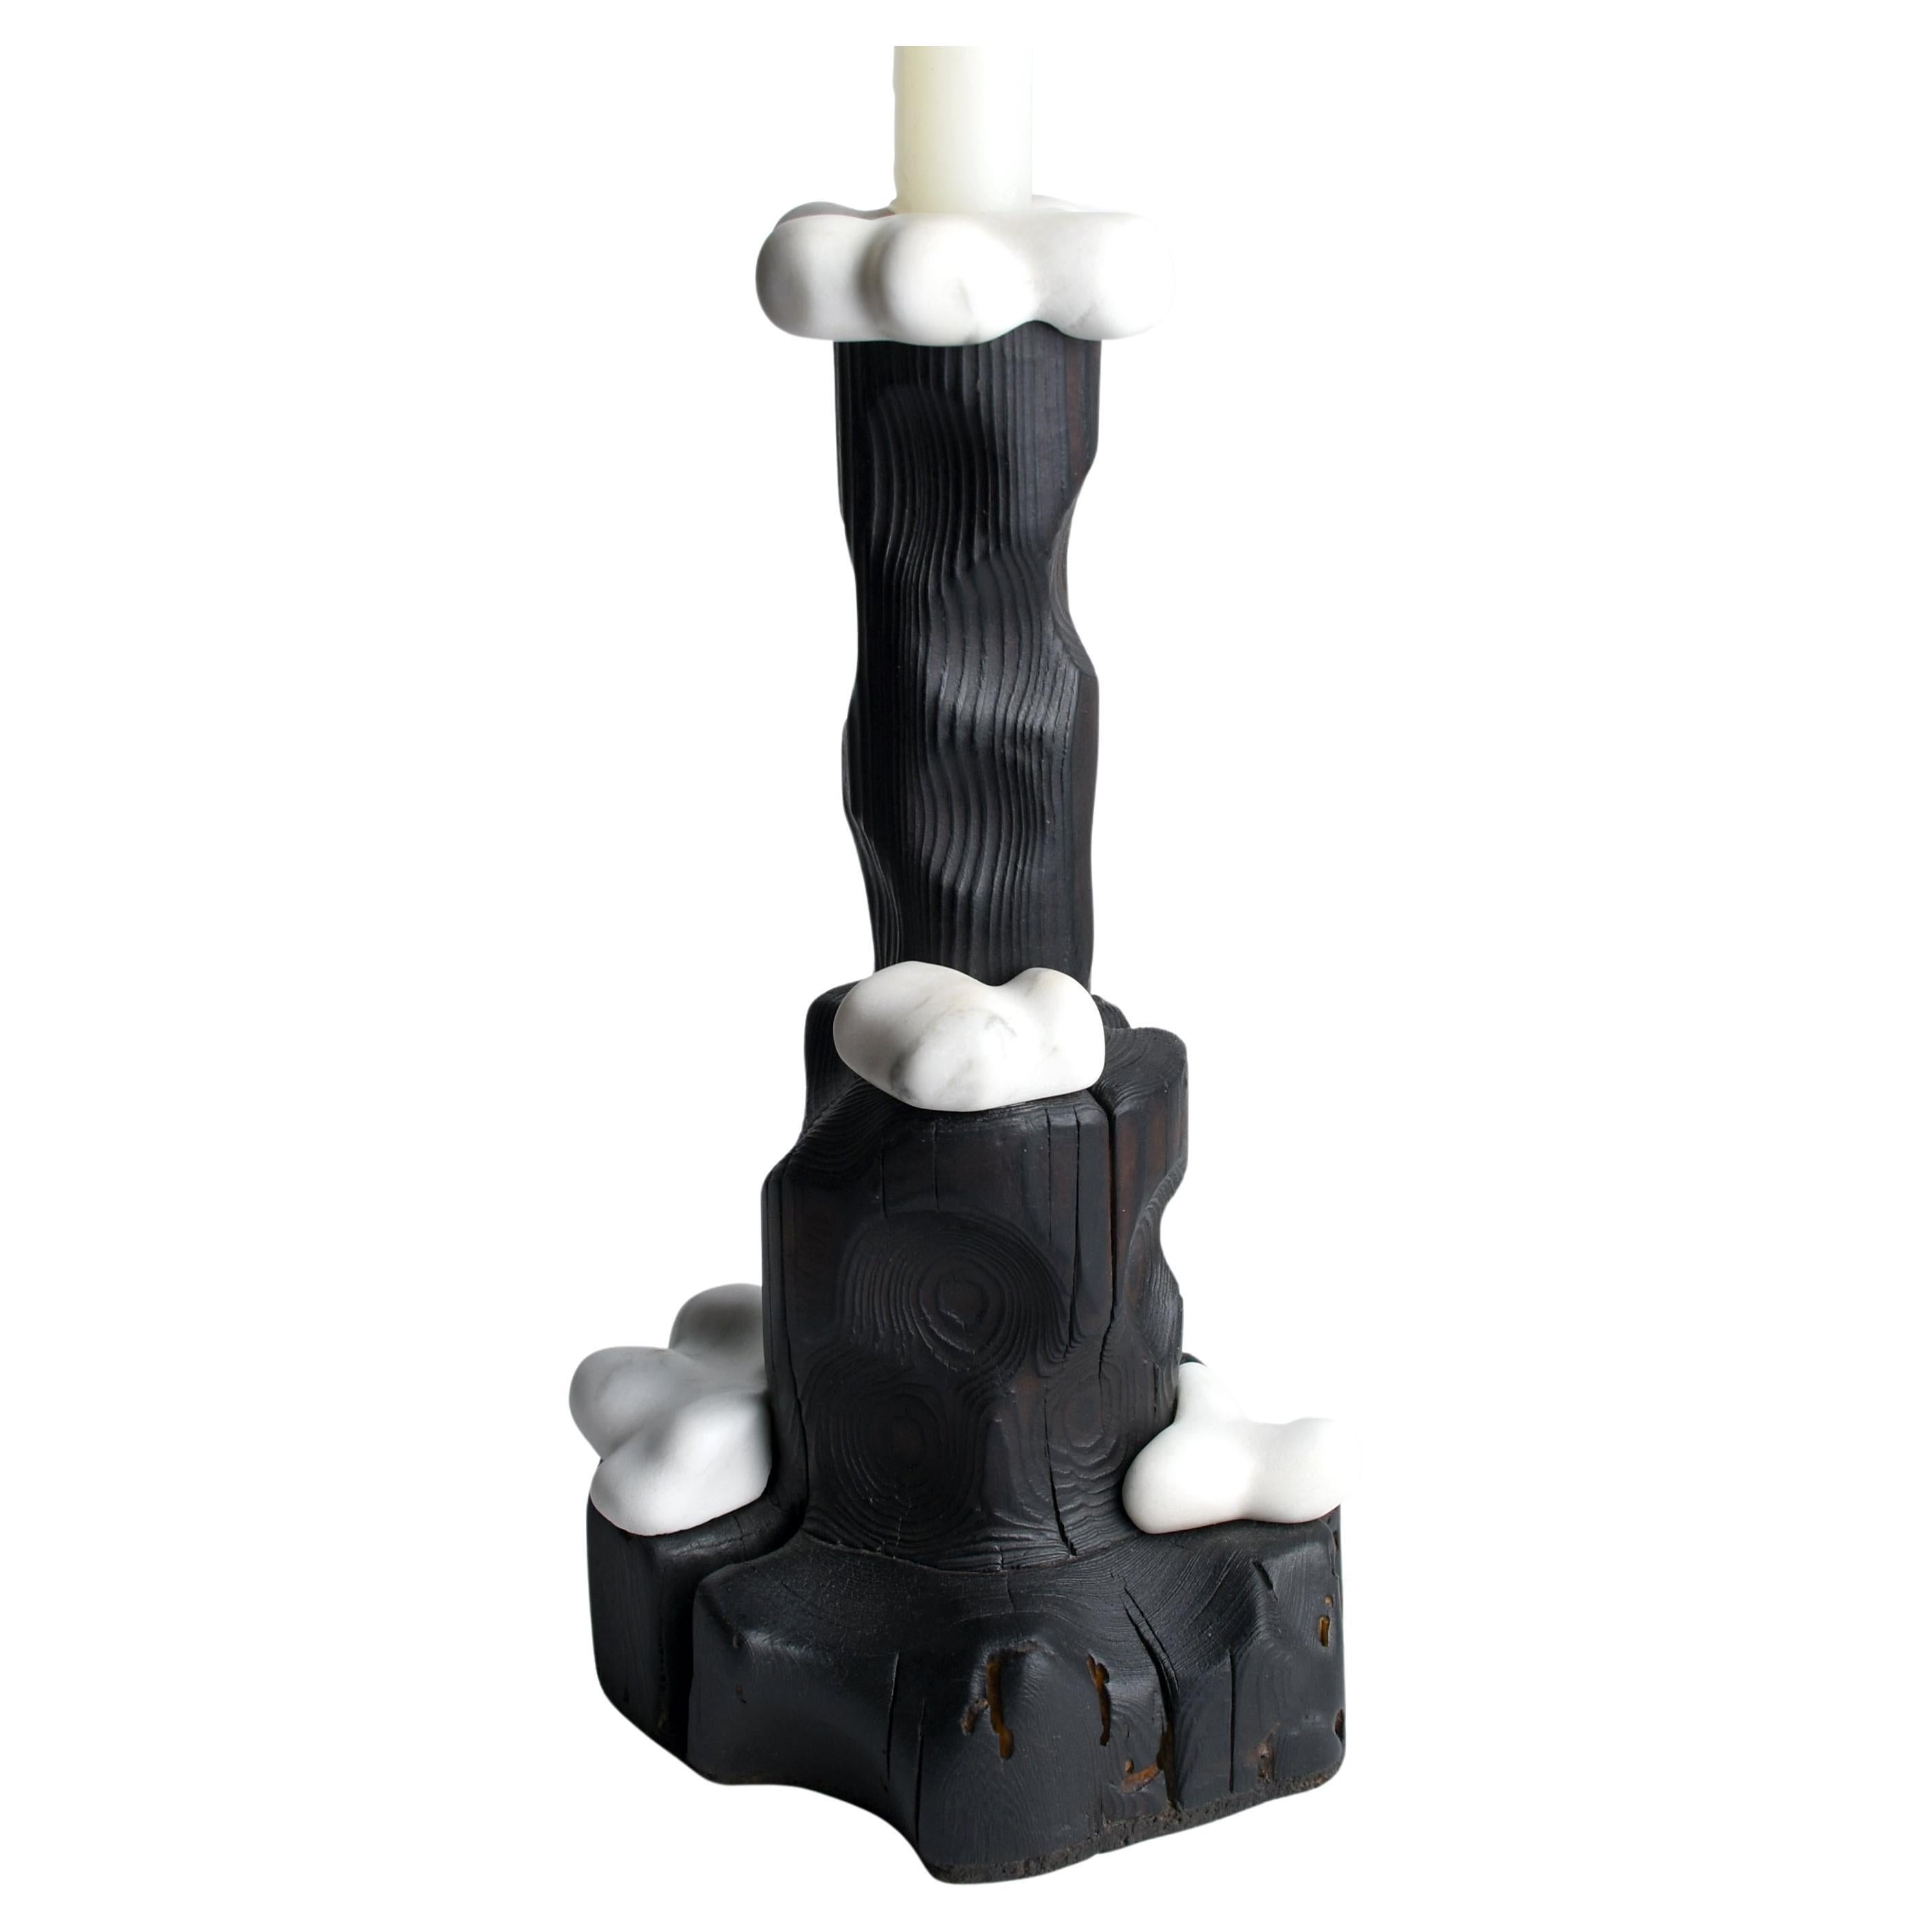 Cumulus, Sculptured Candle Holder from Reclaimed Burned Wood and White Marble